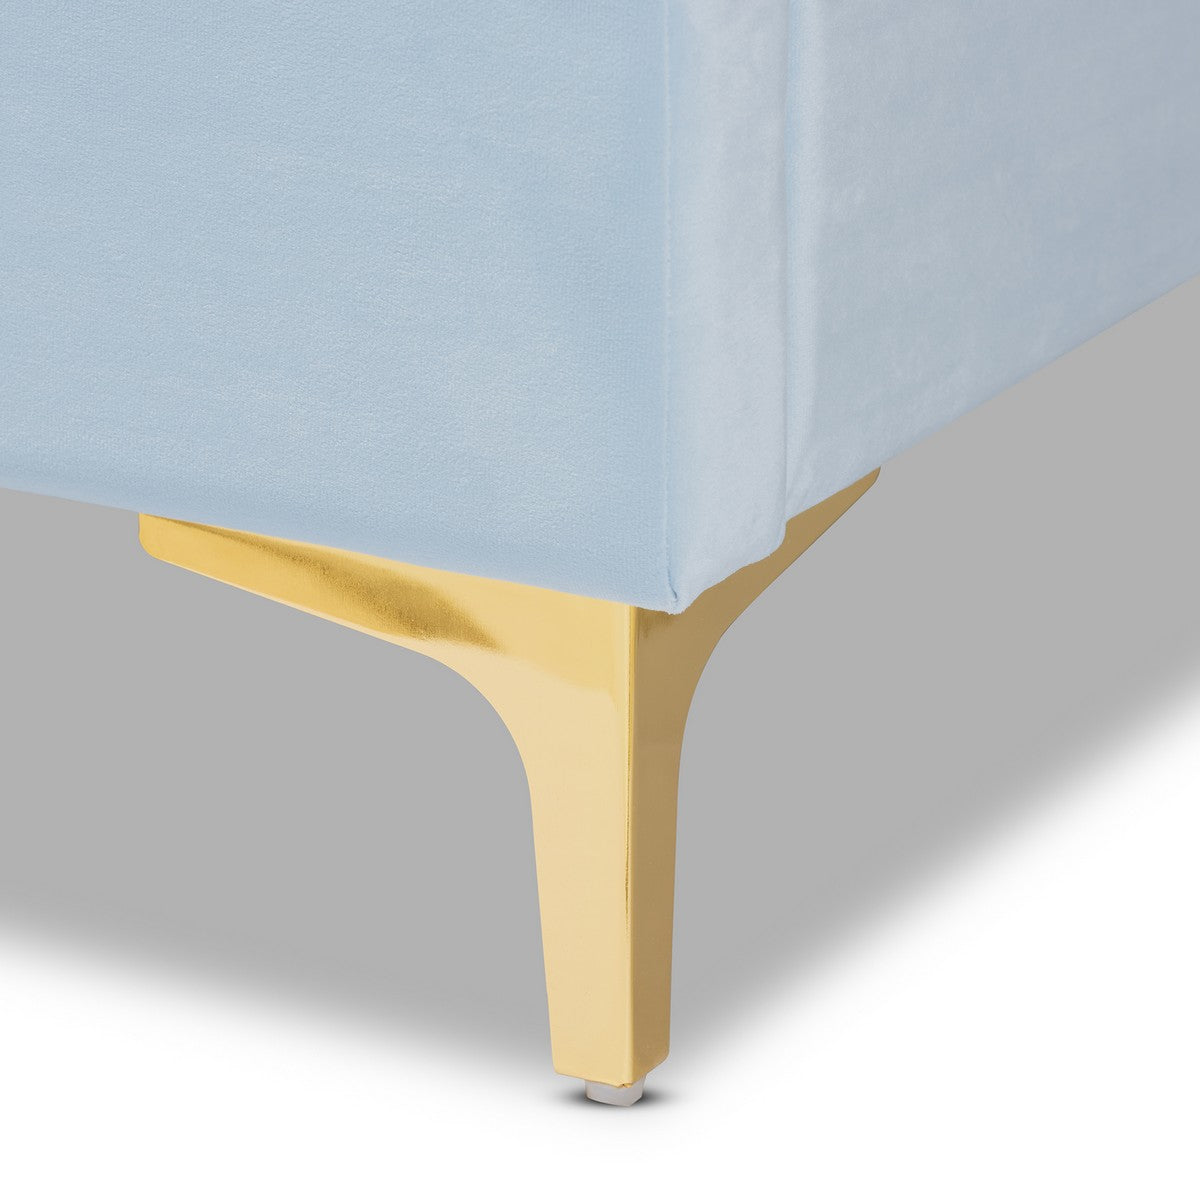 Baxton Studio Saverio Glam and Luxe Light Blue Velvet Fabric Upholstered Queen Size Platform Bed with Gold-Tone Legs